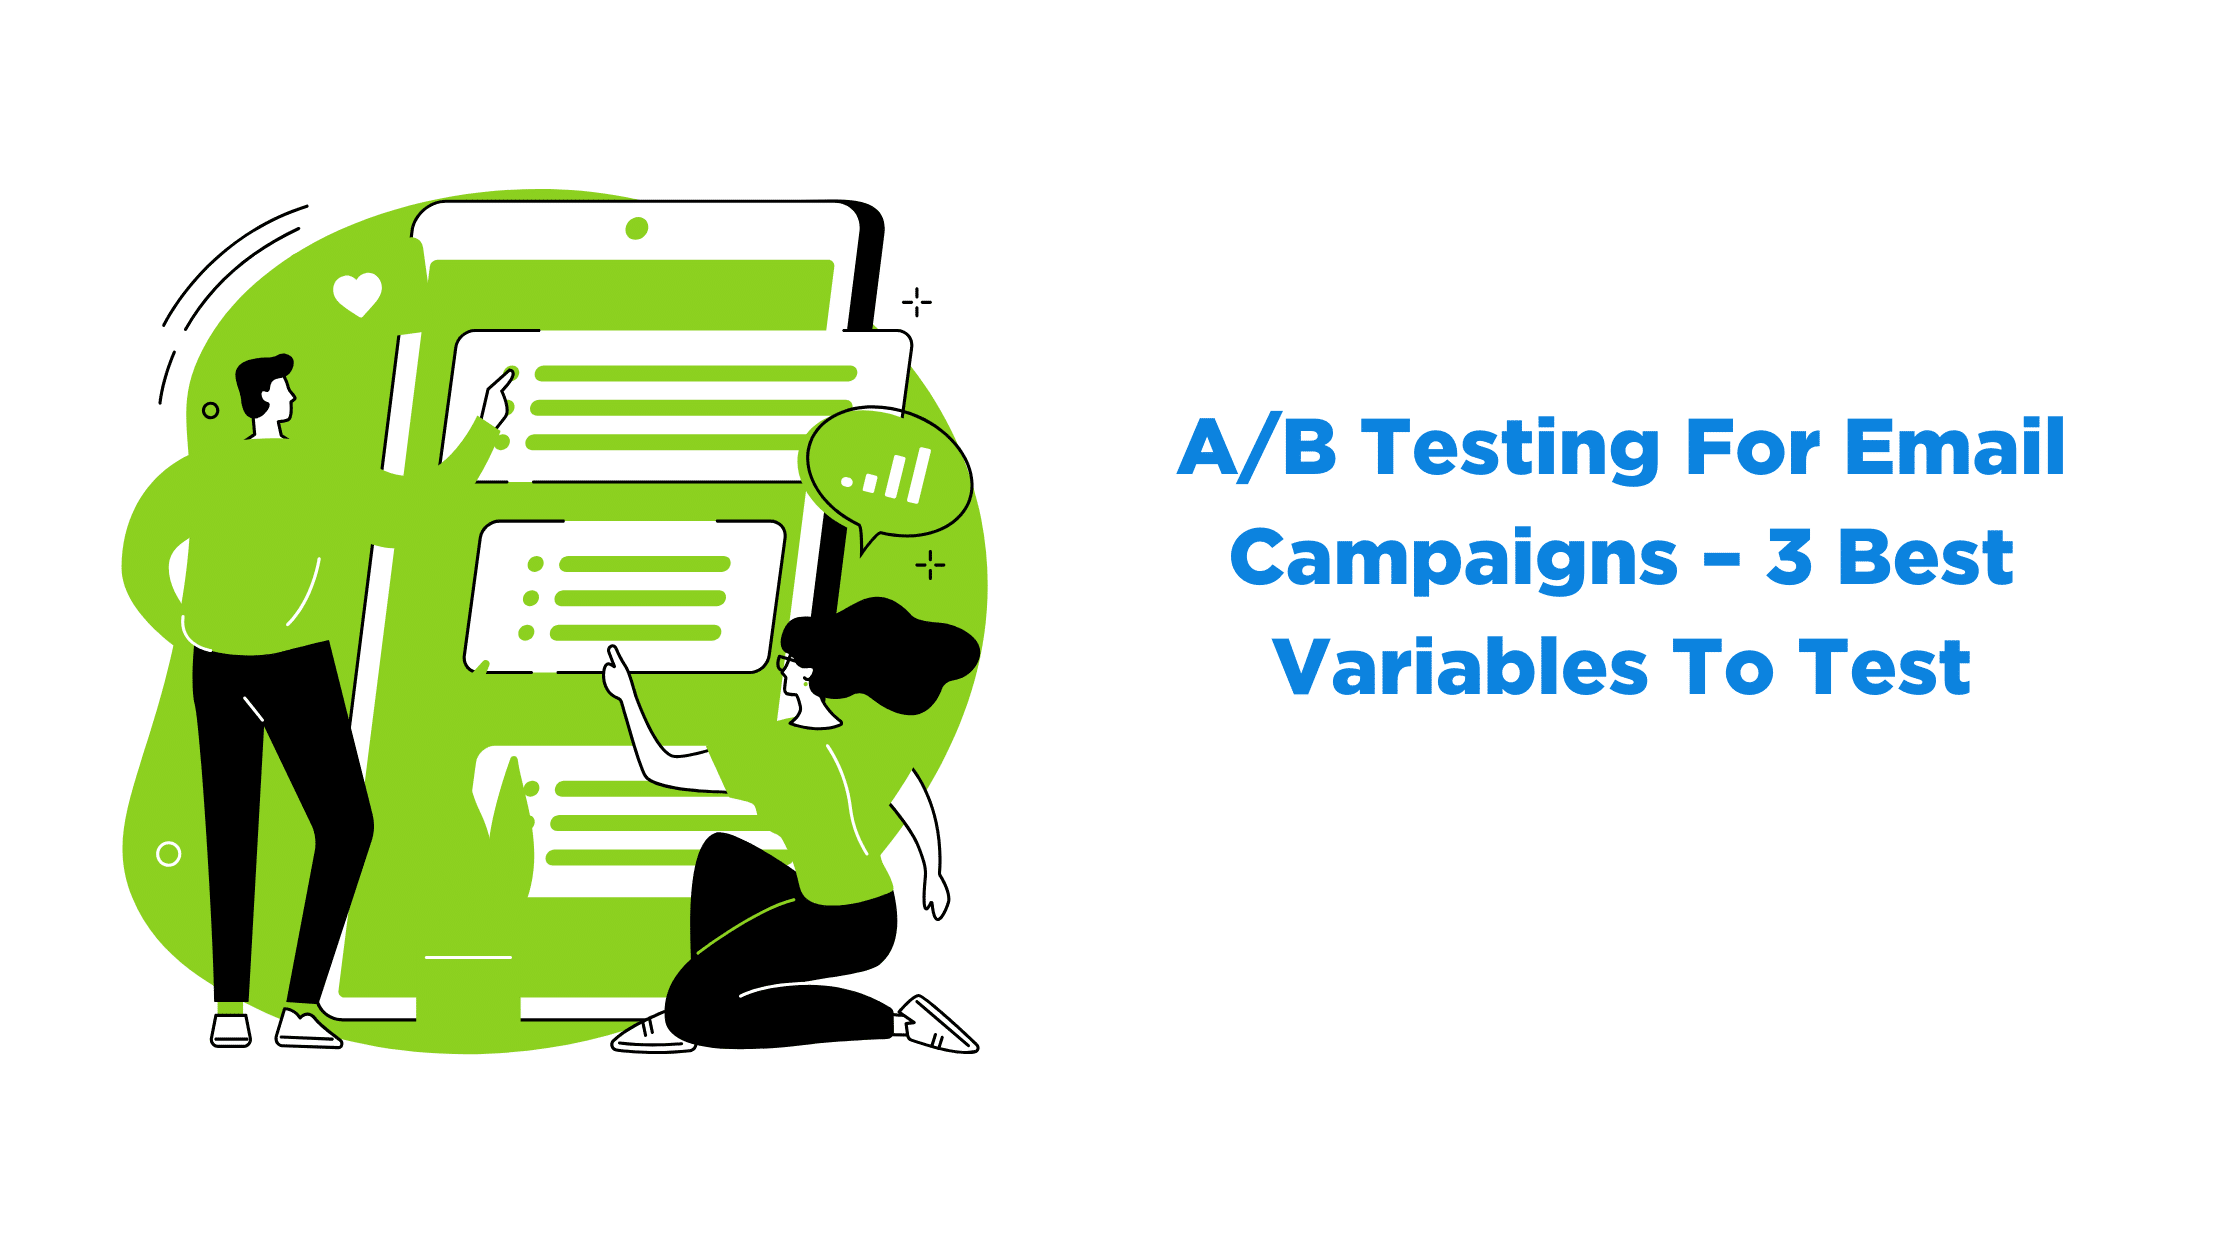 A/B Testing For Email Campaigns – 3 Best Variables To Test